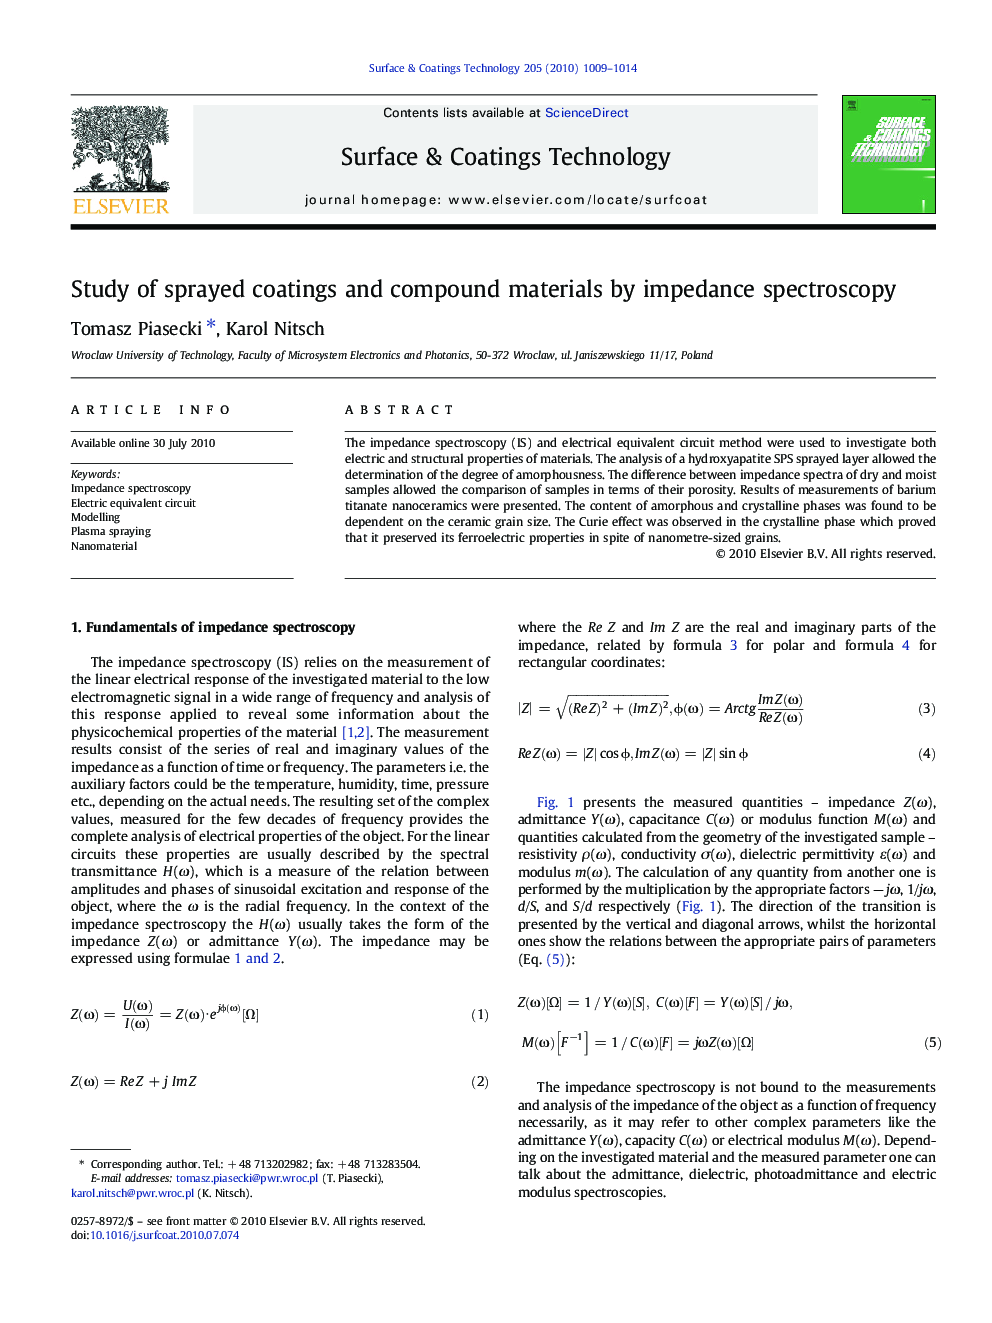 Study of sprayed coatings and compound materials by impedance spectroscopy